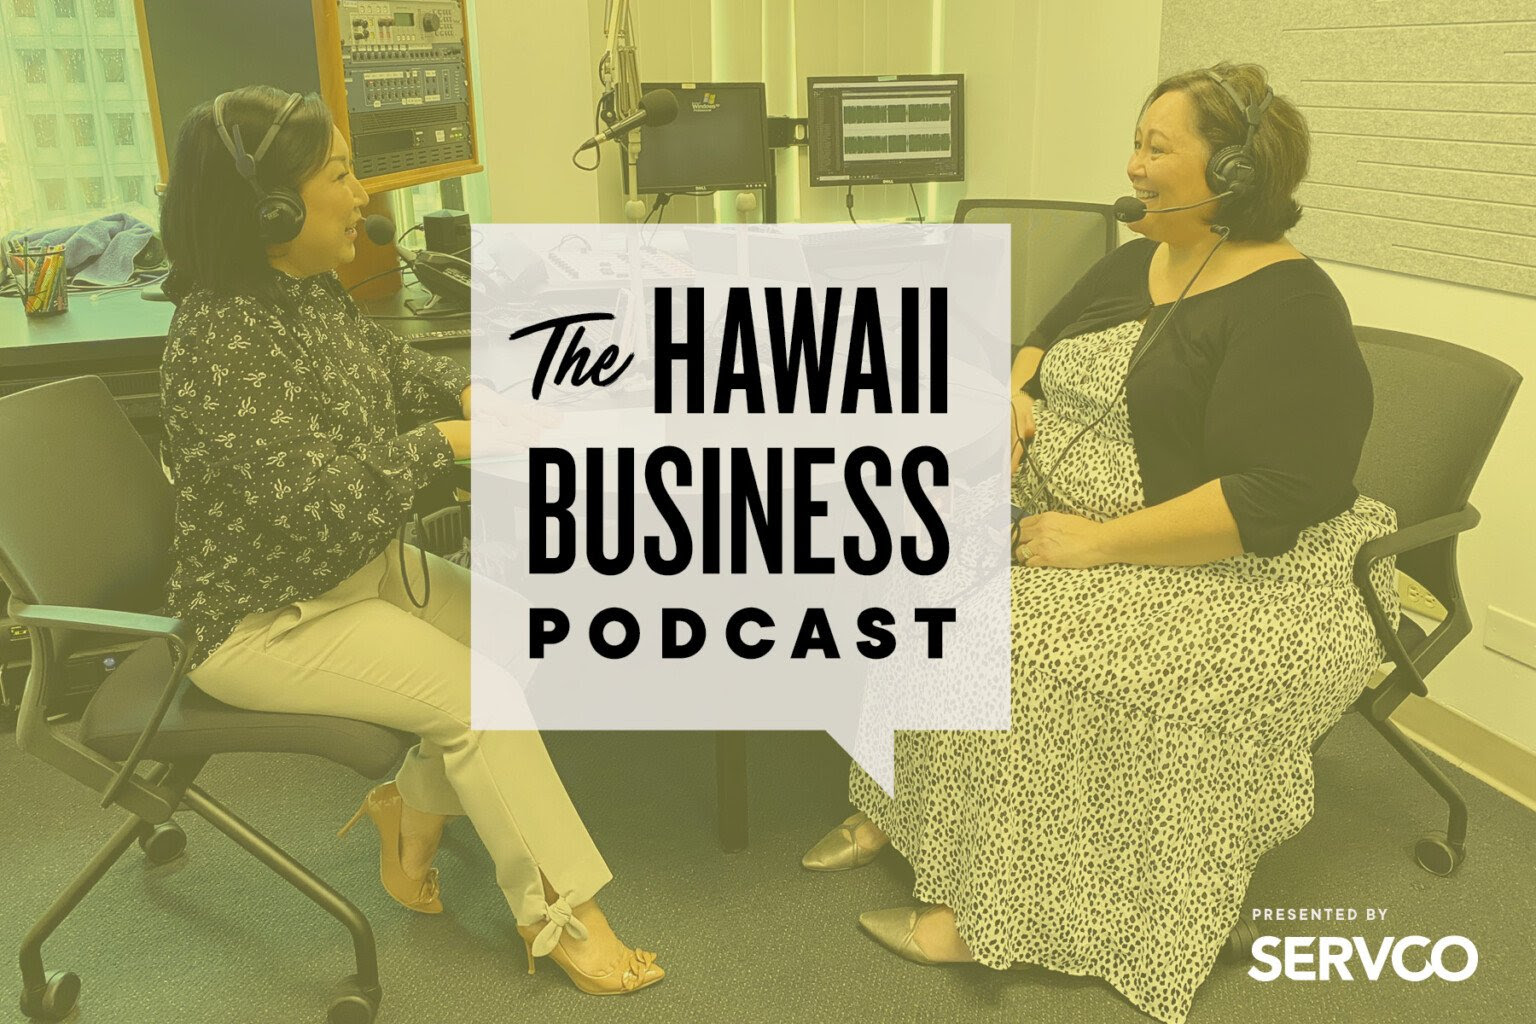 Click here to listen to the this episode of The Hawaii Business Podcast featuring Paddy Kauhane!